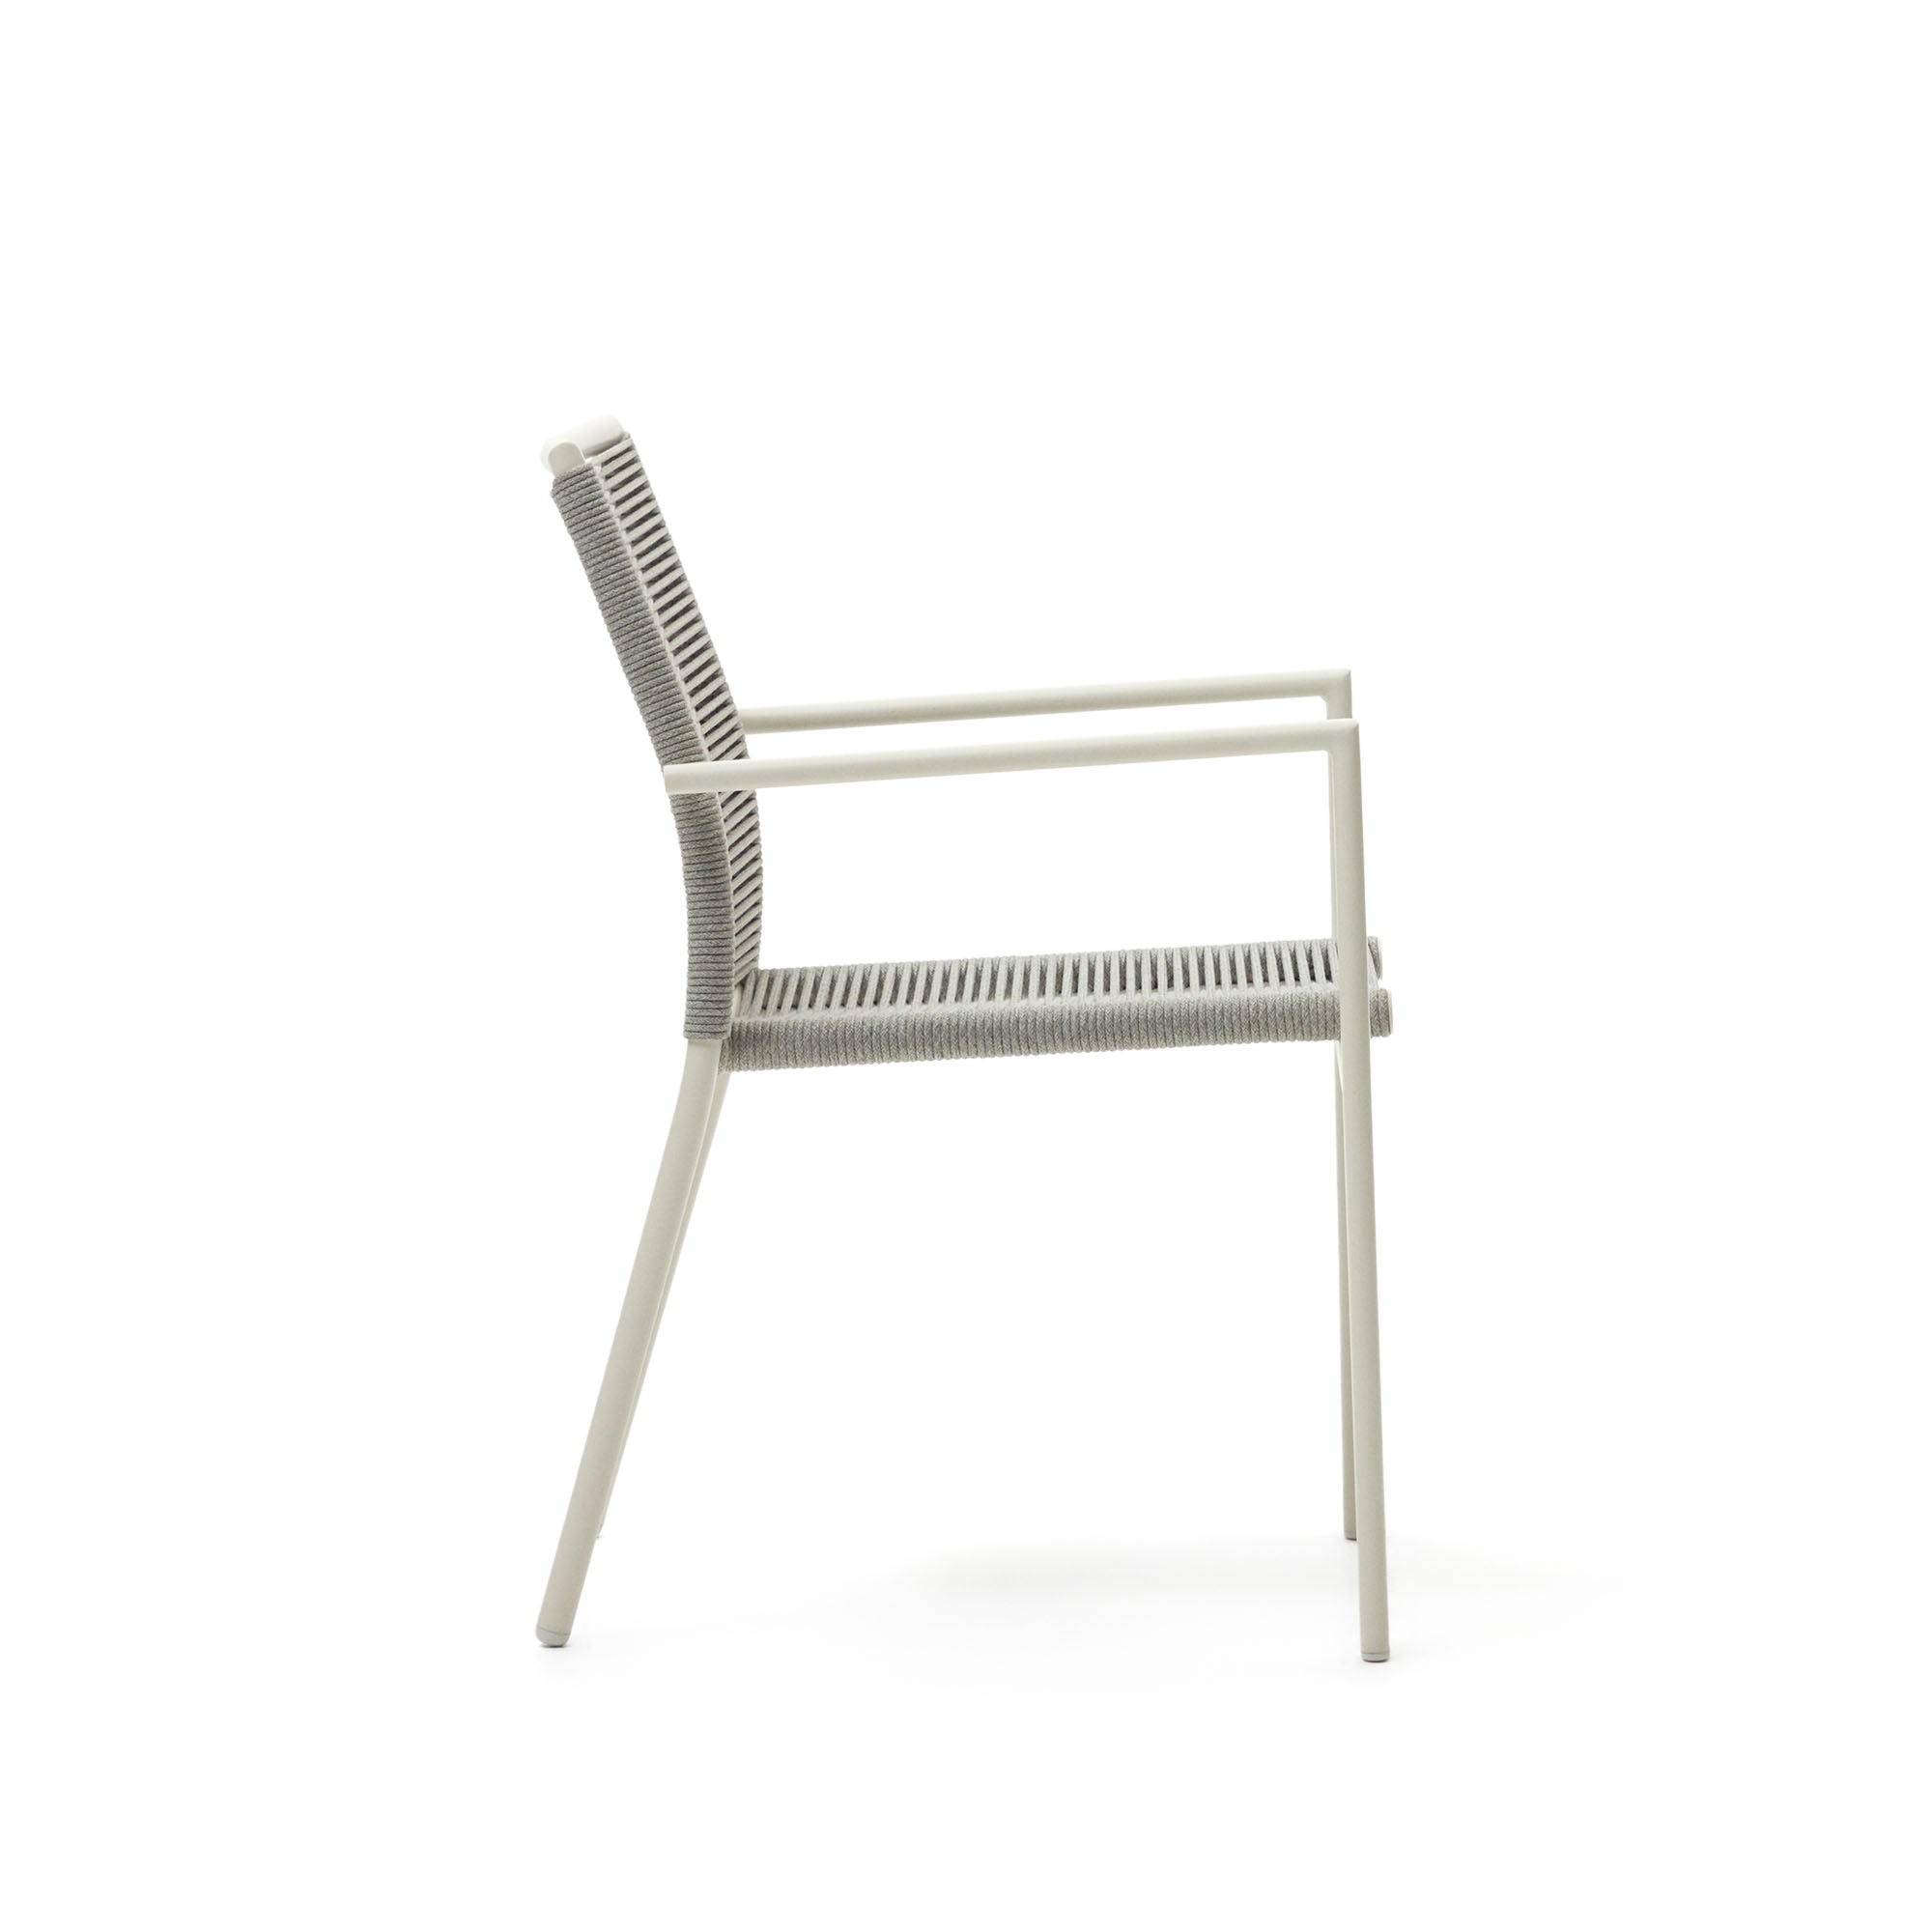 Culip aluminium and cord stackable outdoor chair in white